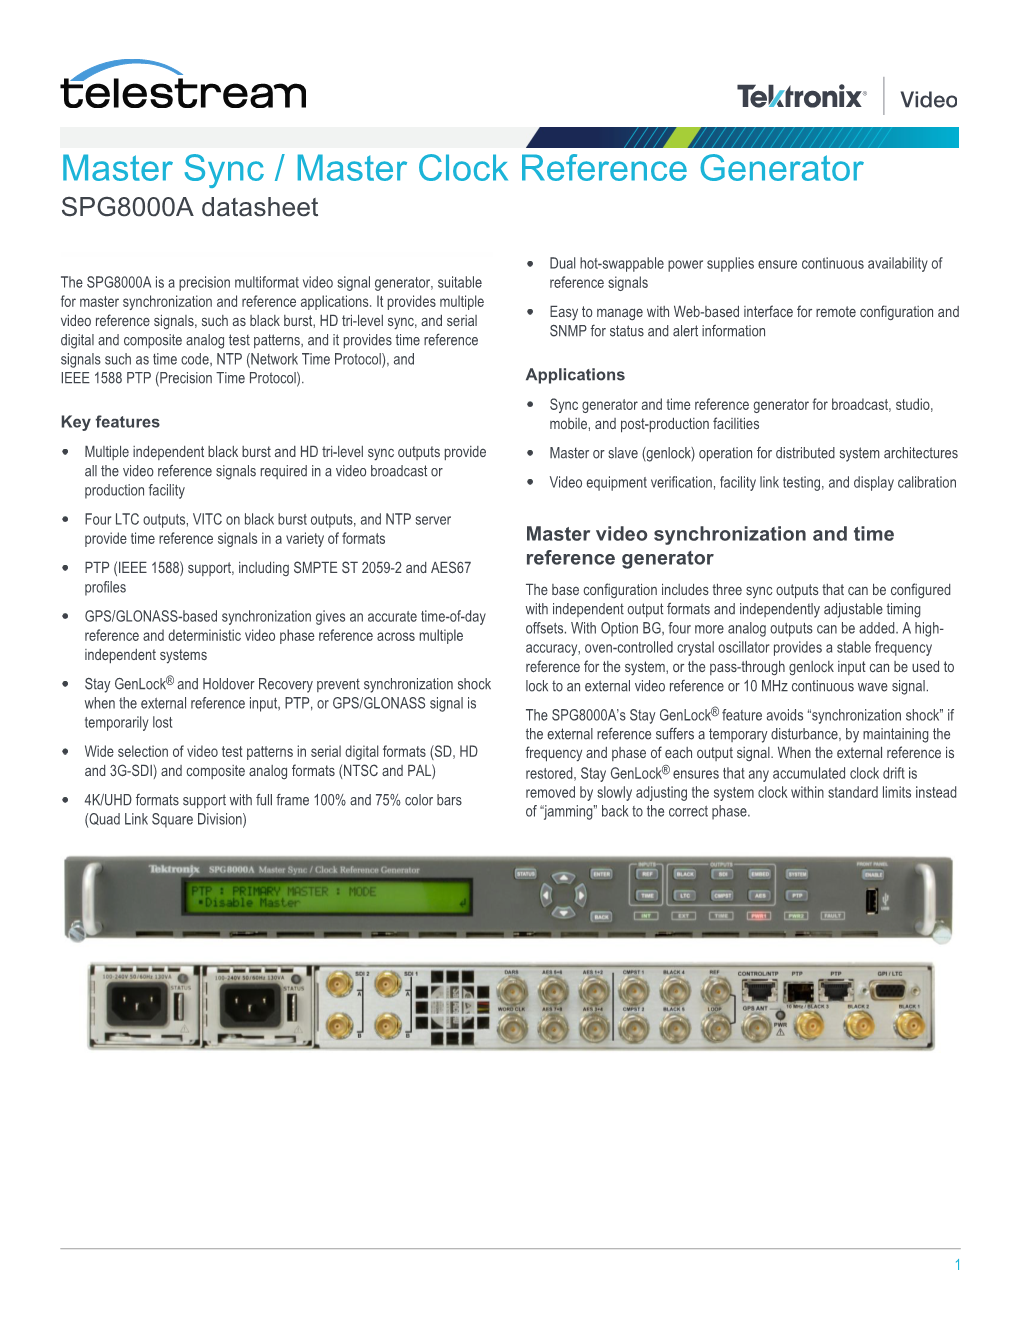 SPG8000A Master Sync / Master Clock Reference